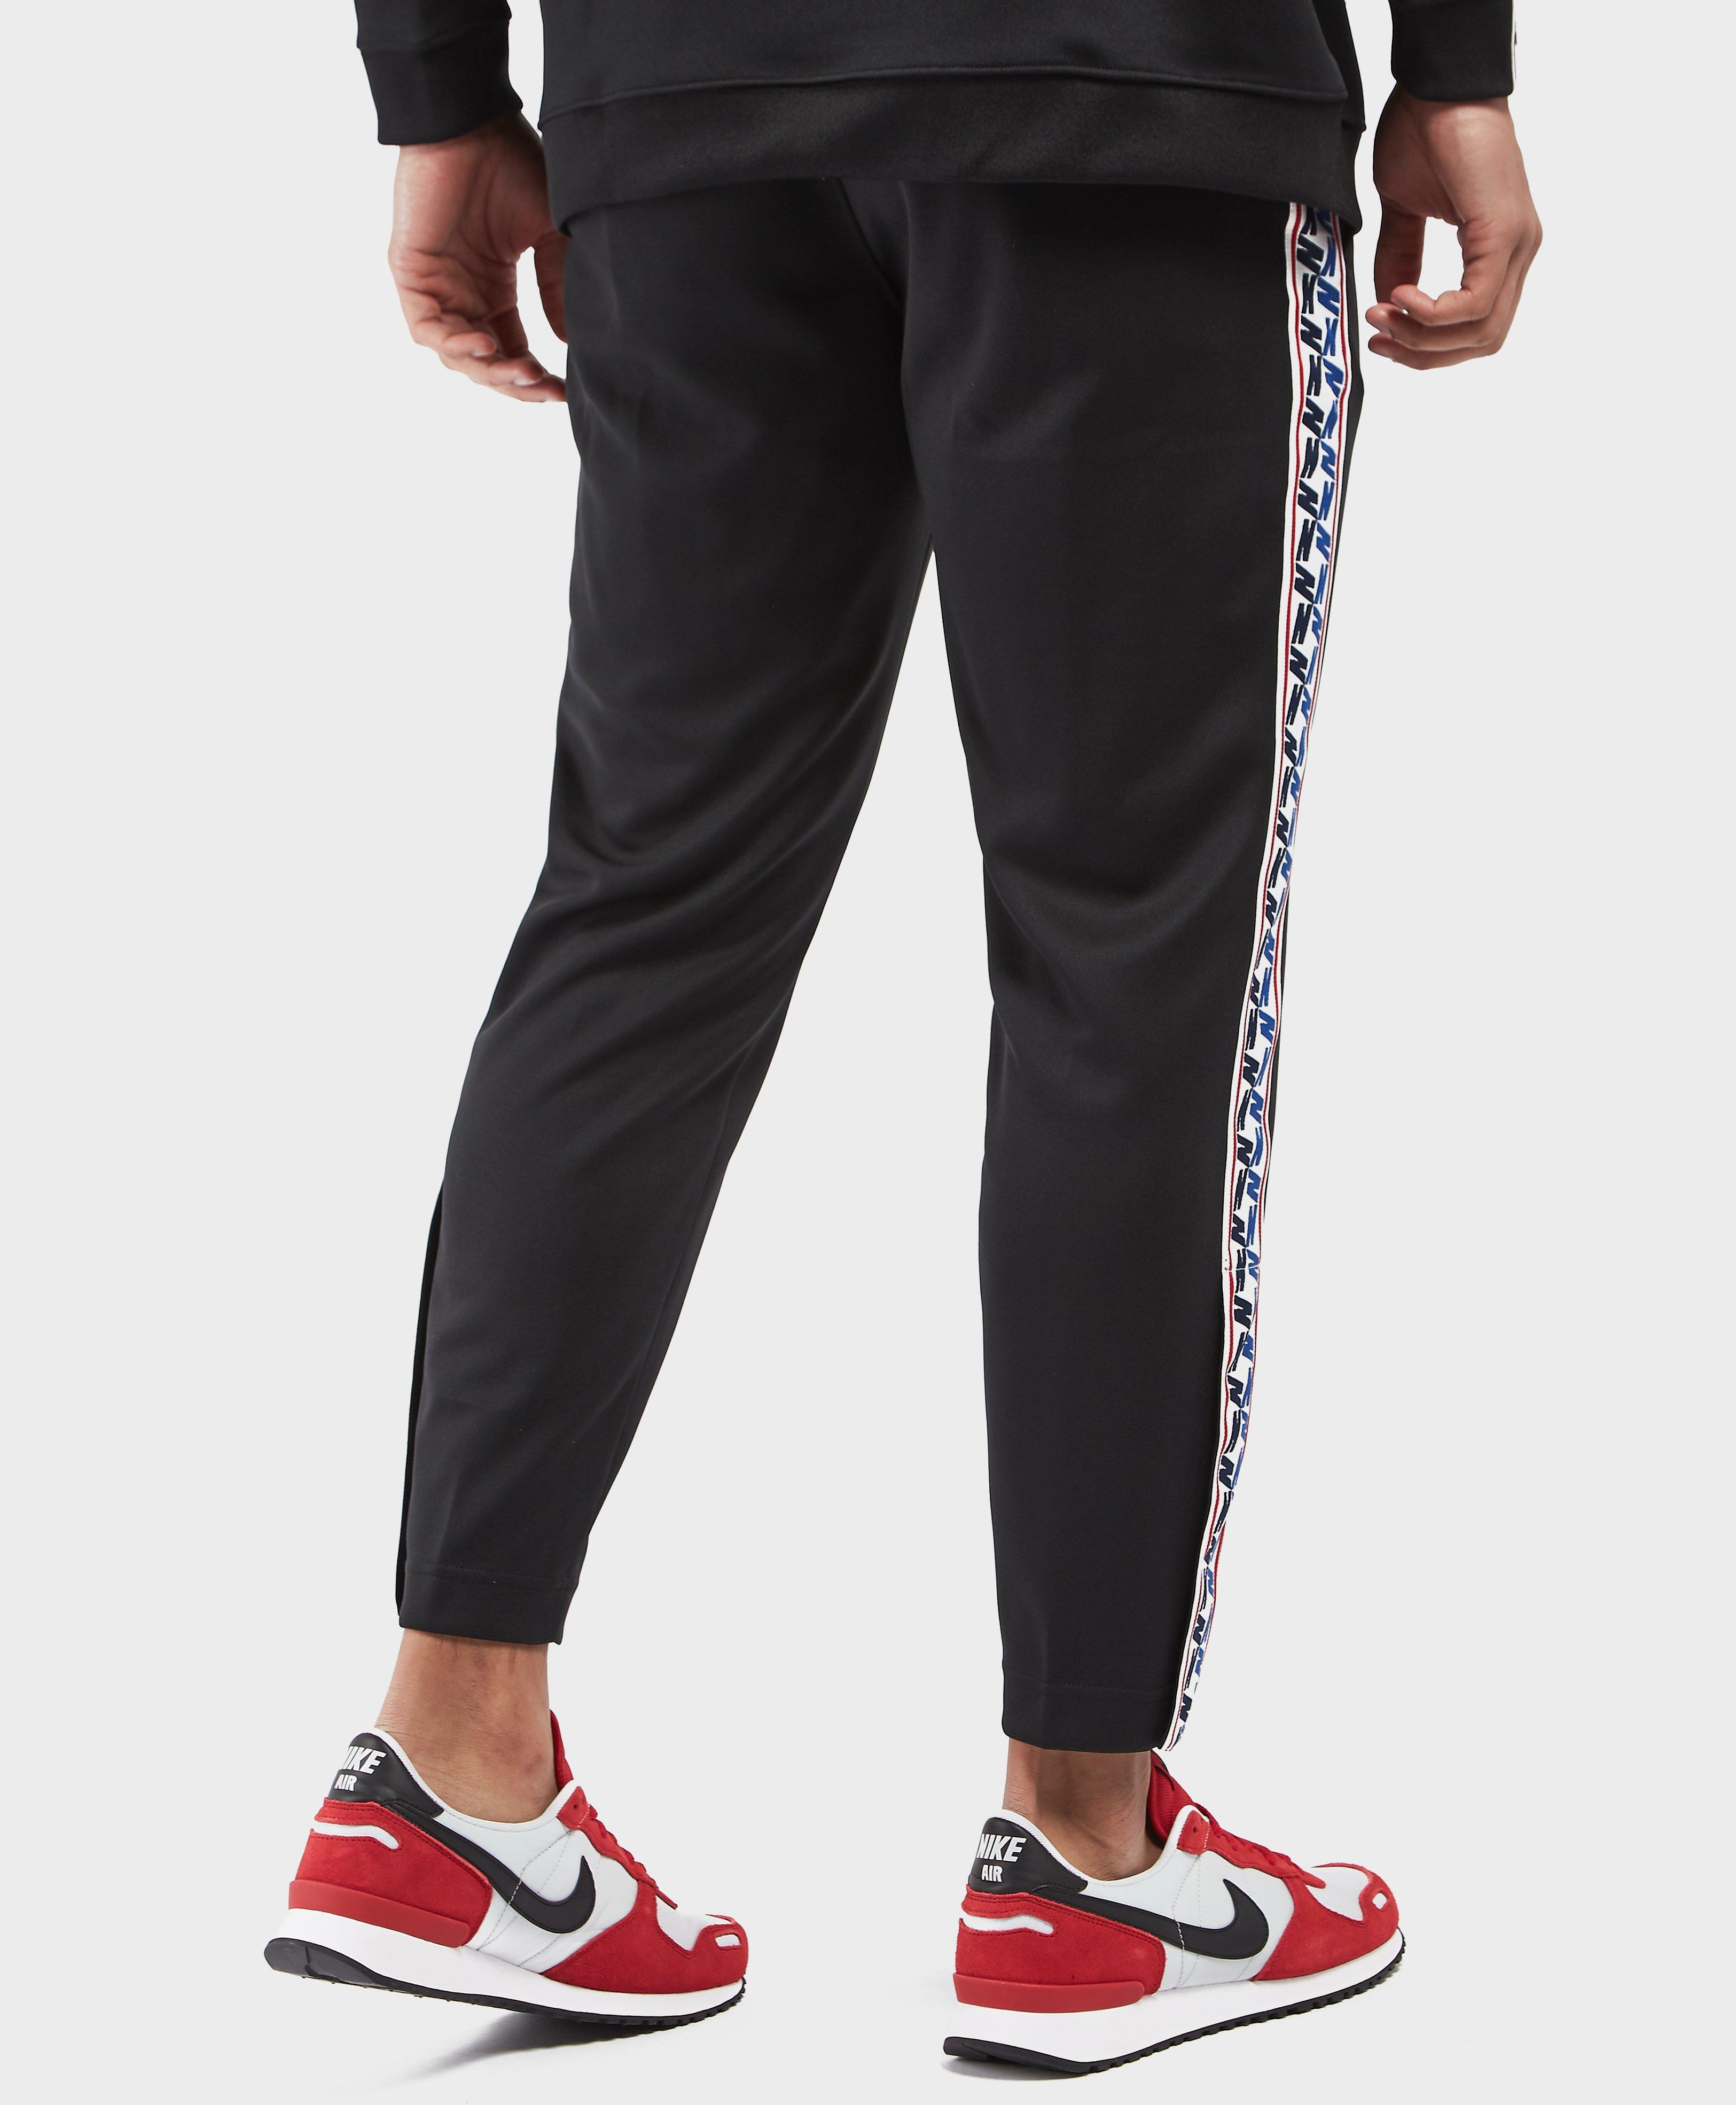 Nike Synthetic Taped Poly Track Pants in Black for Men - Lyst